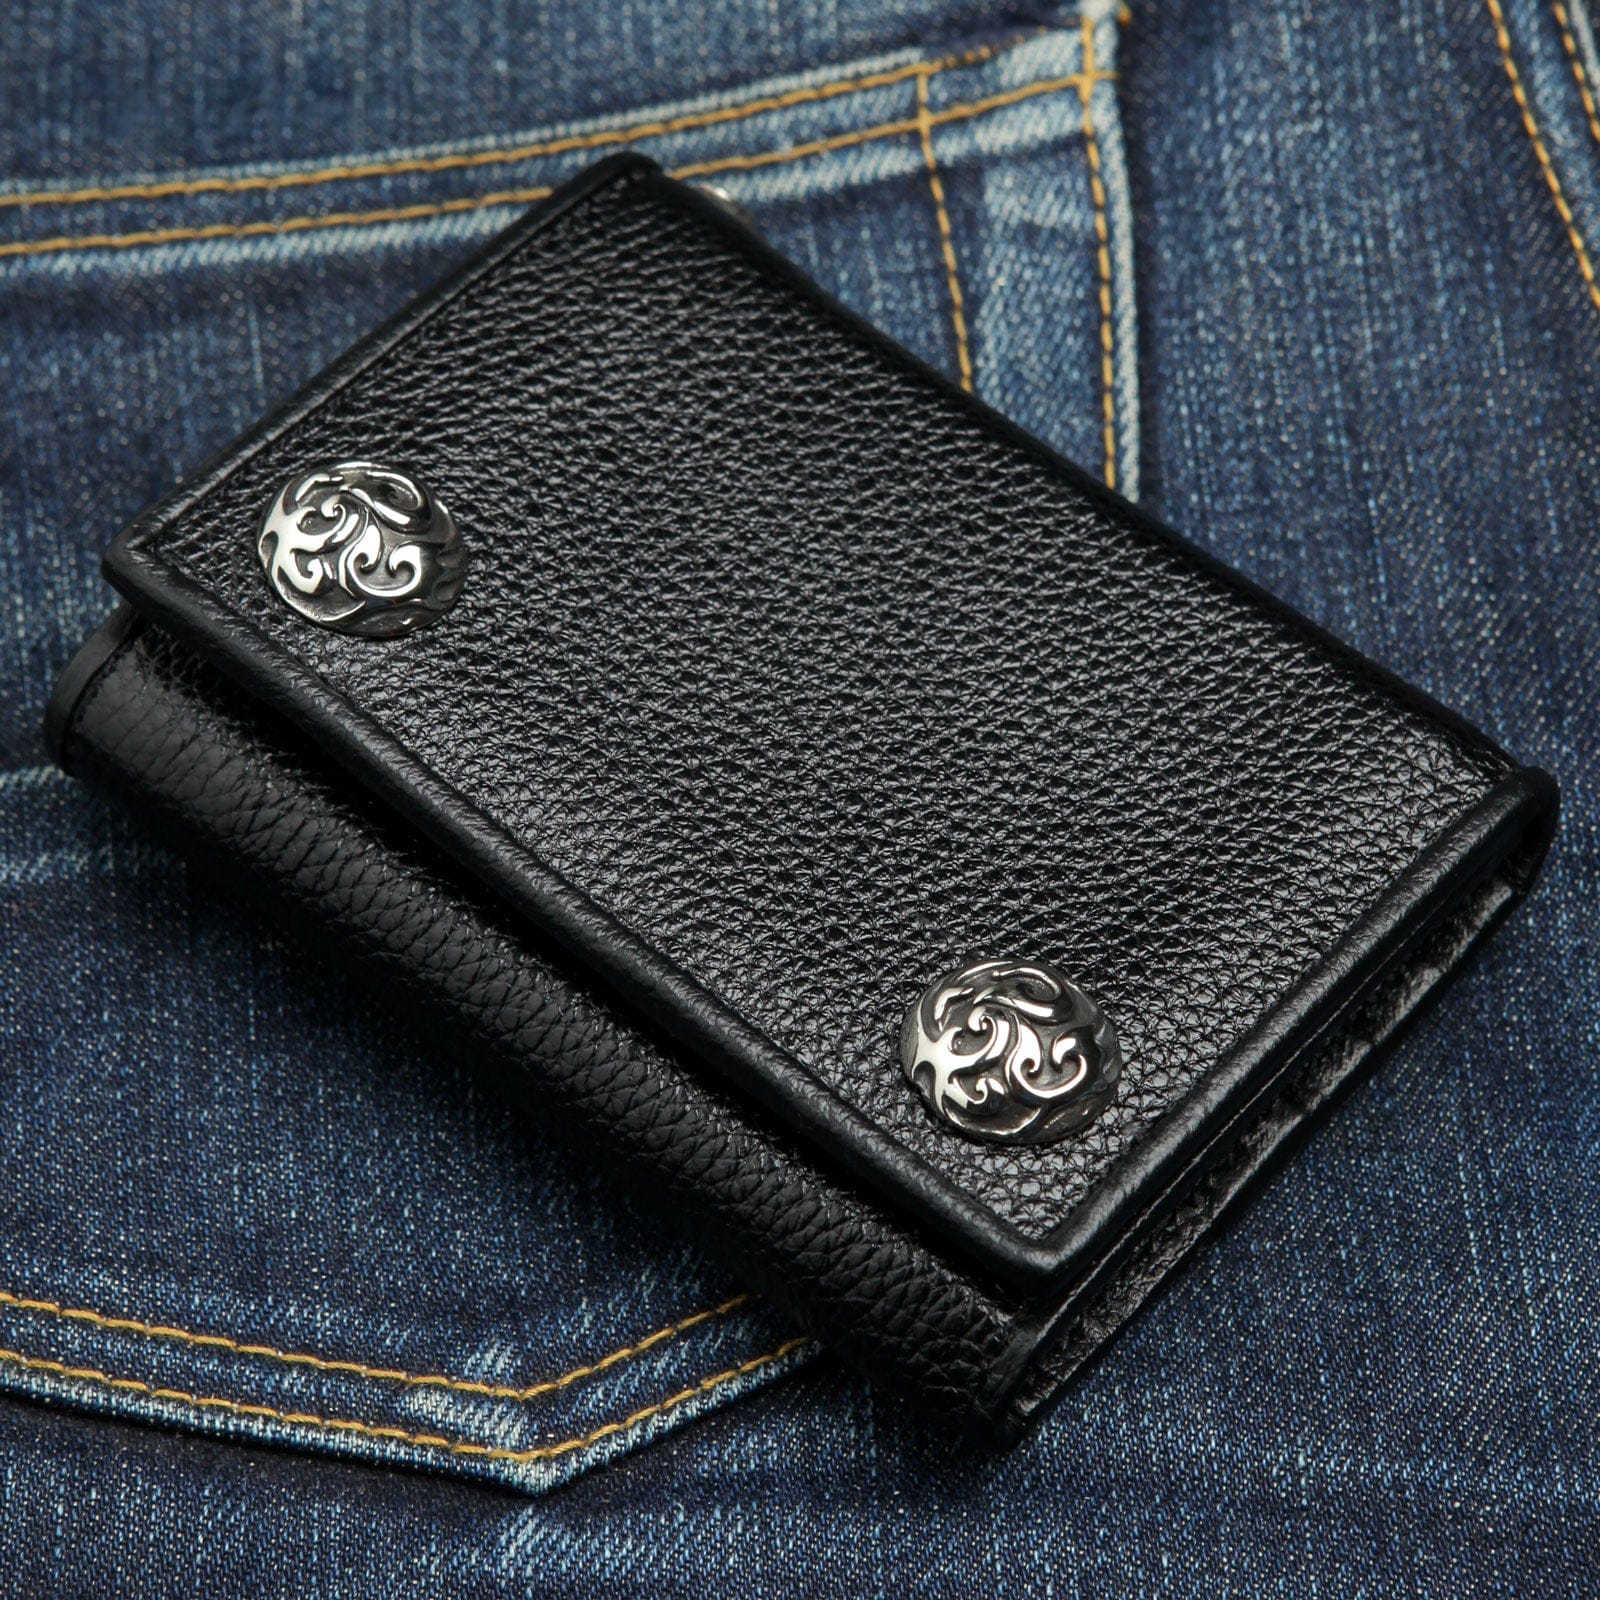 High Quality Genuine Cow Leather Wallet for Men